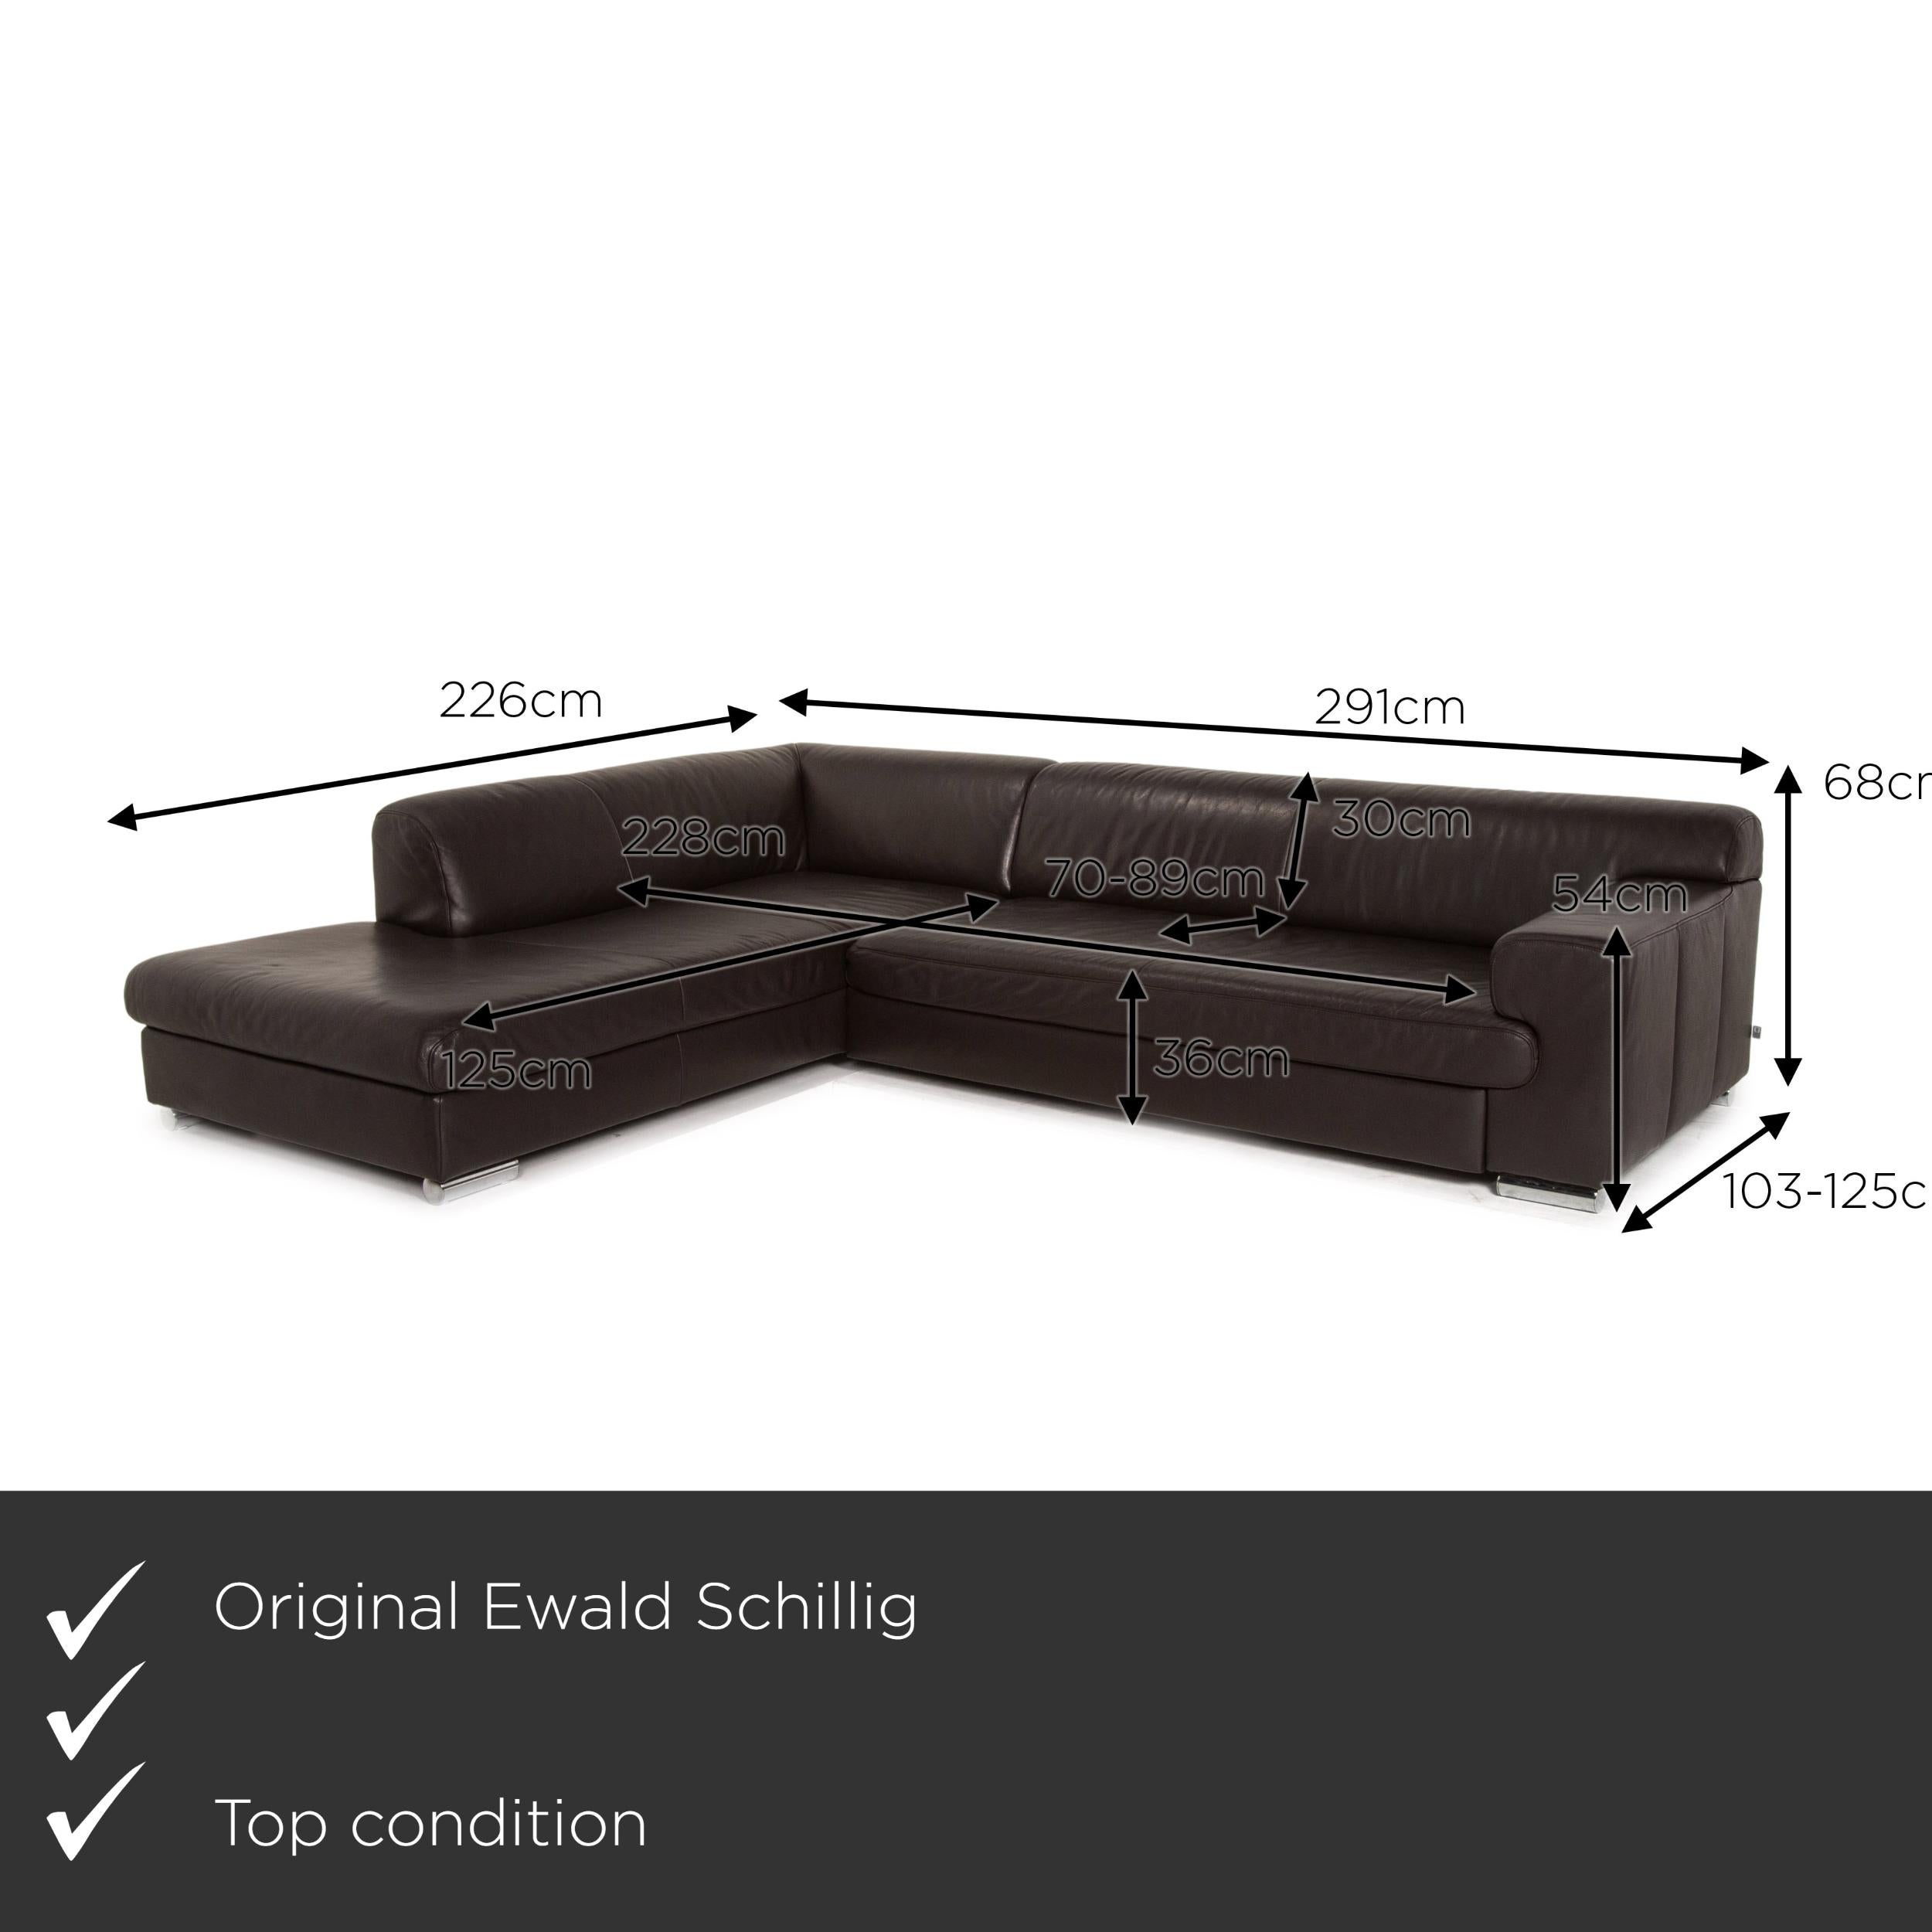 We present to you an Ewald Schillig leather corner sofa brown dark brown sofa couch.


 Product measurements in centimeters:
 

Depth: 103
Width: 291
Height: 68
Seat height: 36
Rest height: 54
Seat depth: 70
Seat width: 228
Back height: